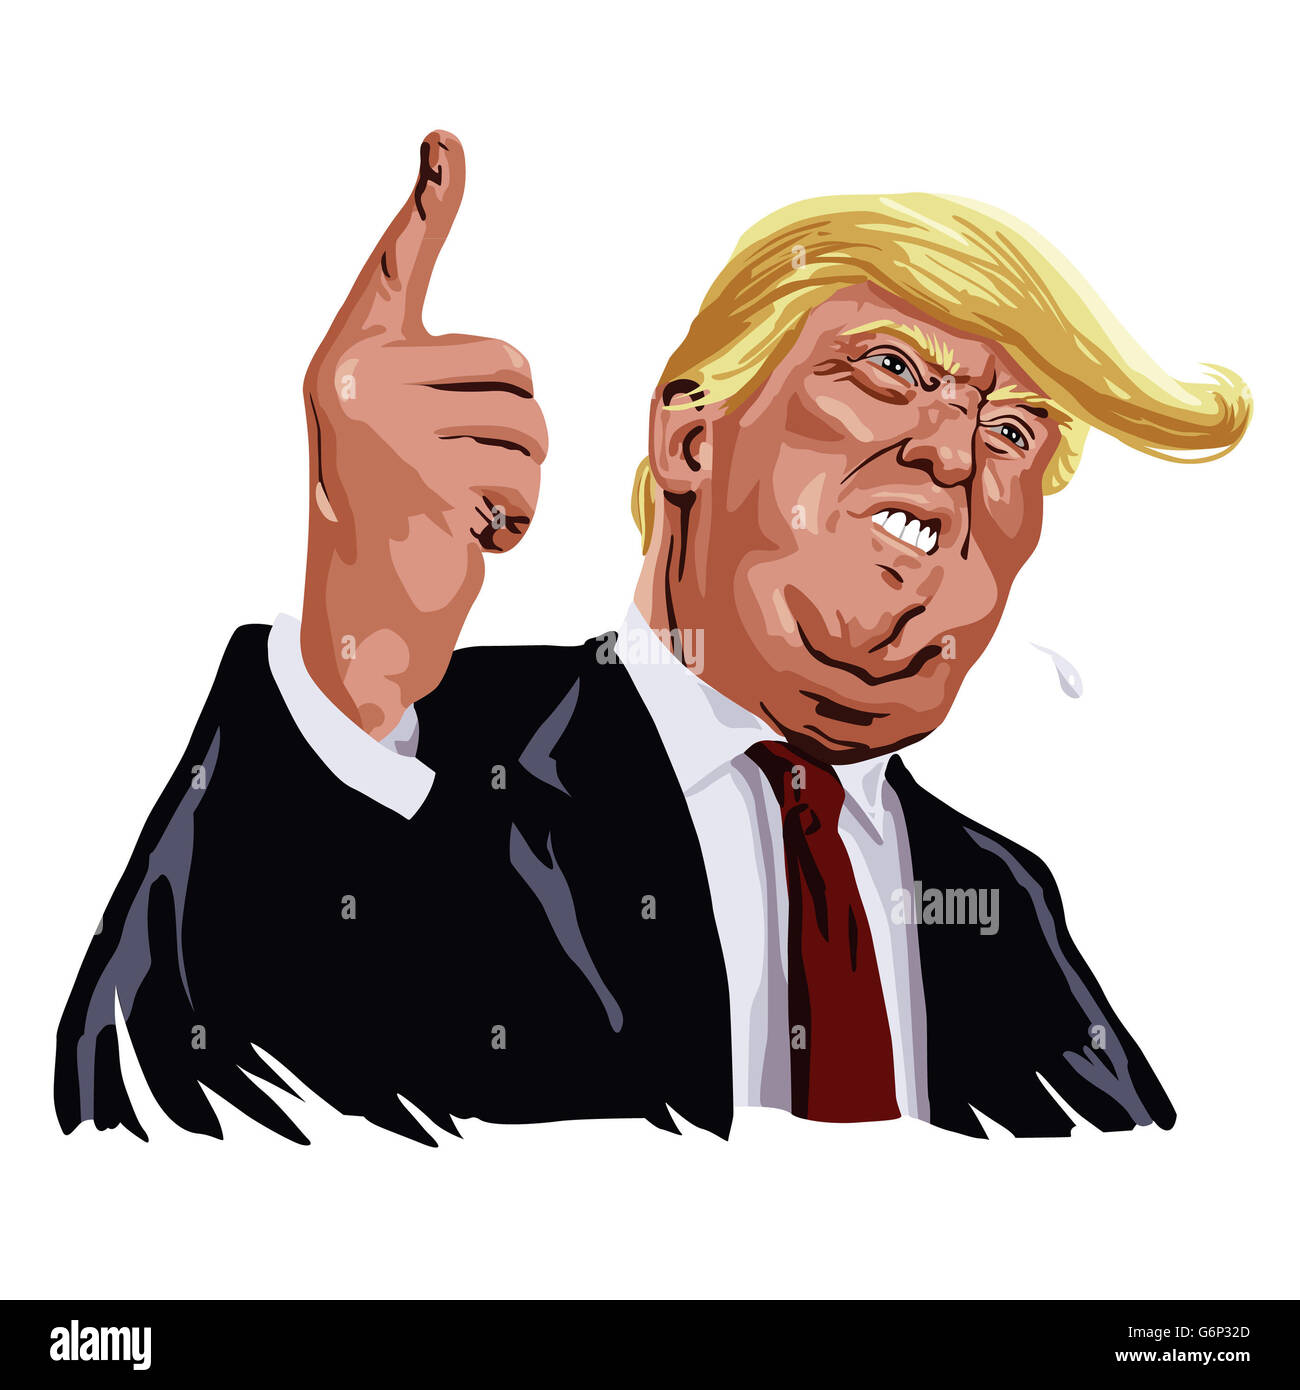 Donald Trump, You're Fired! Caricature Stock Photo